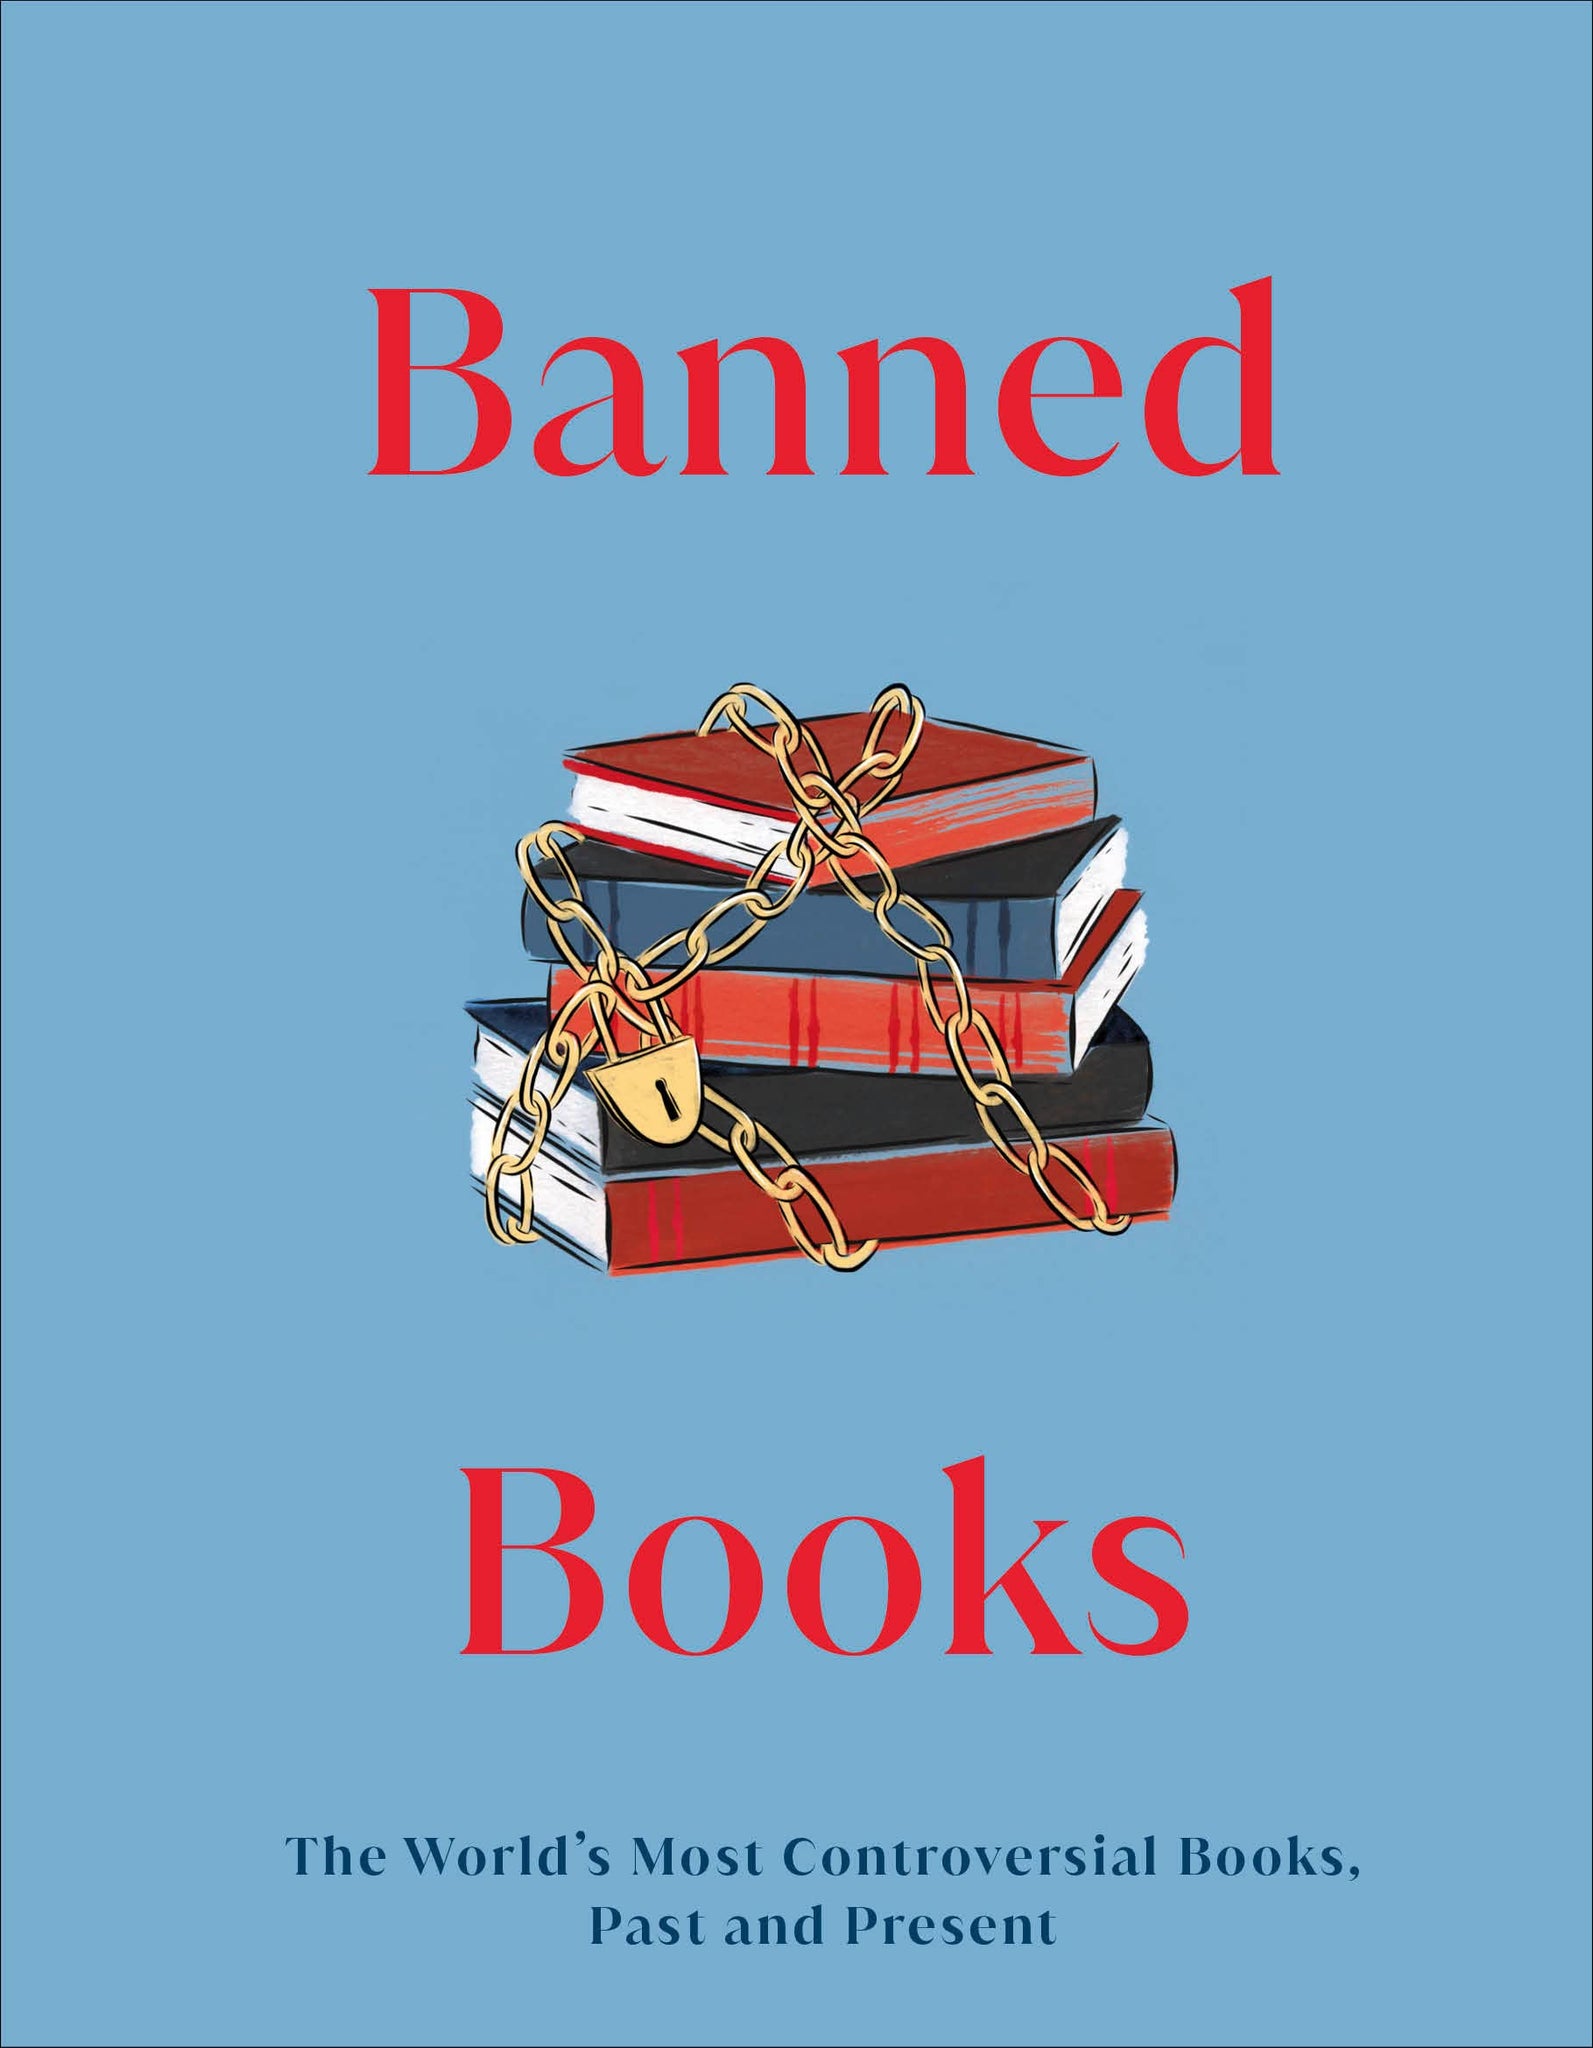 Banned Books: The World's Most Controversial Books, Past and Present